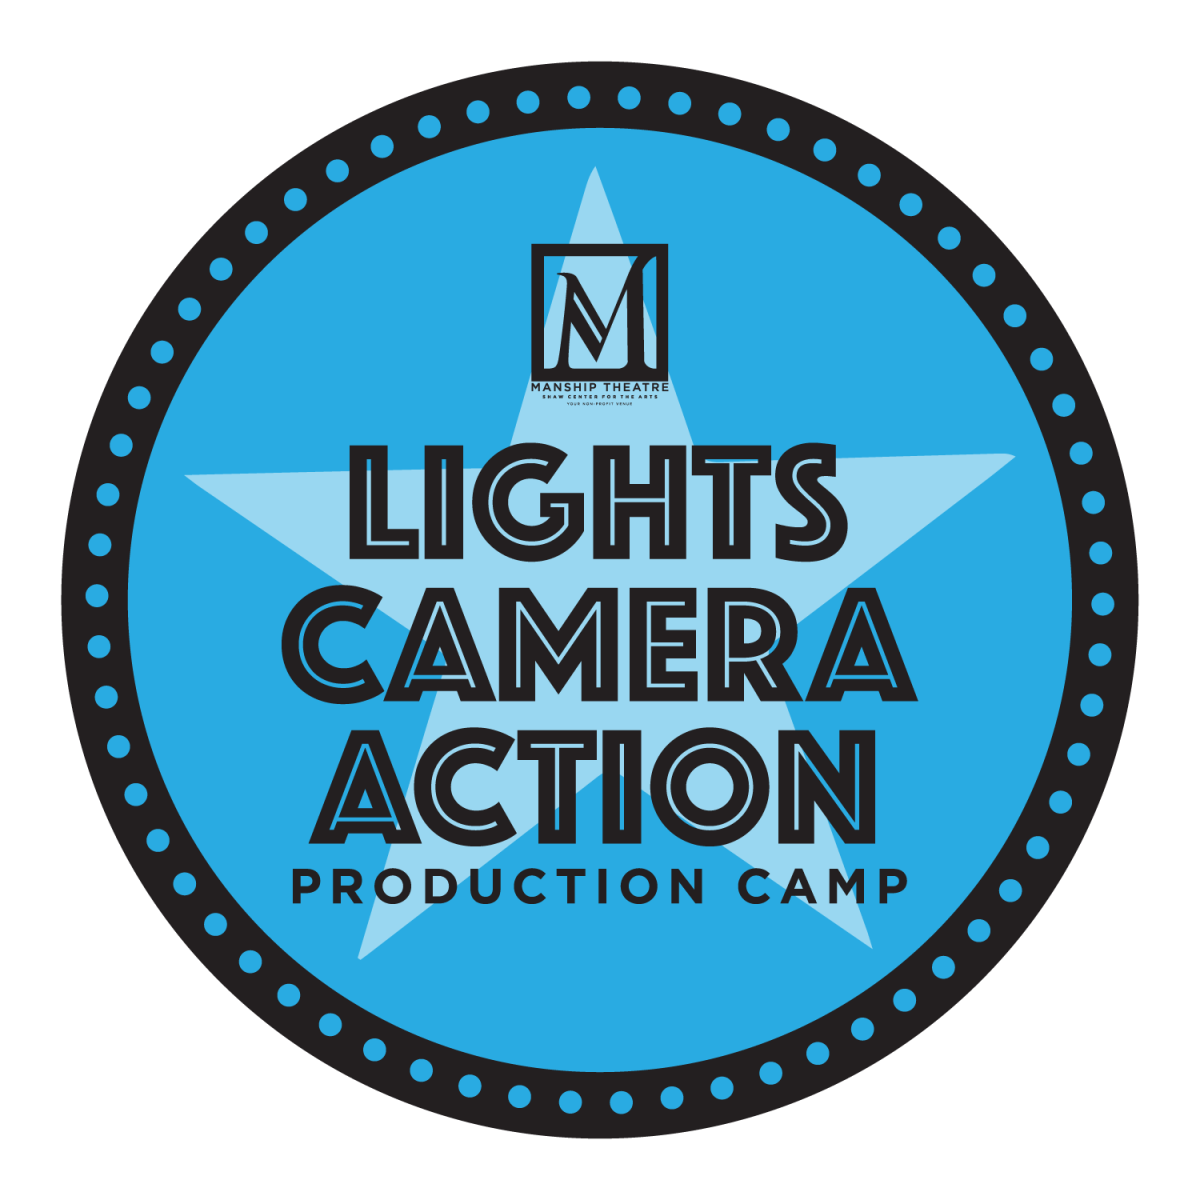 Lights Camera Action Film Production Camp